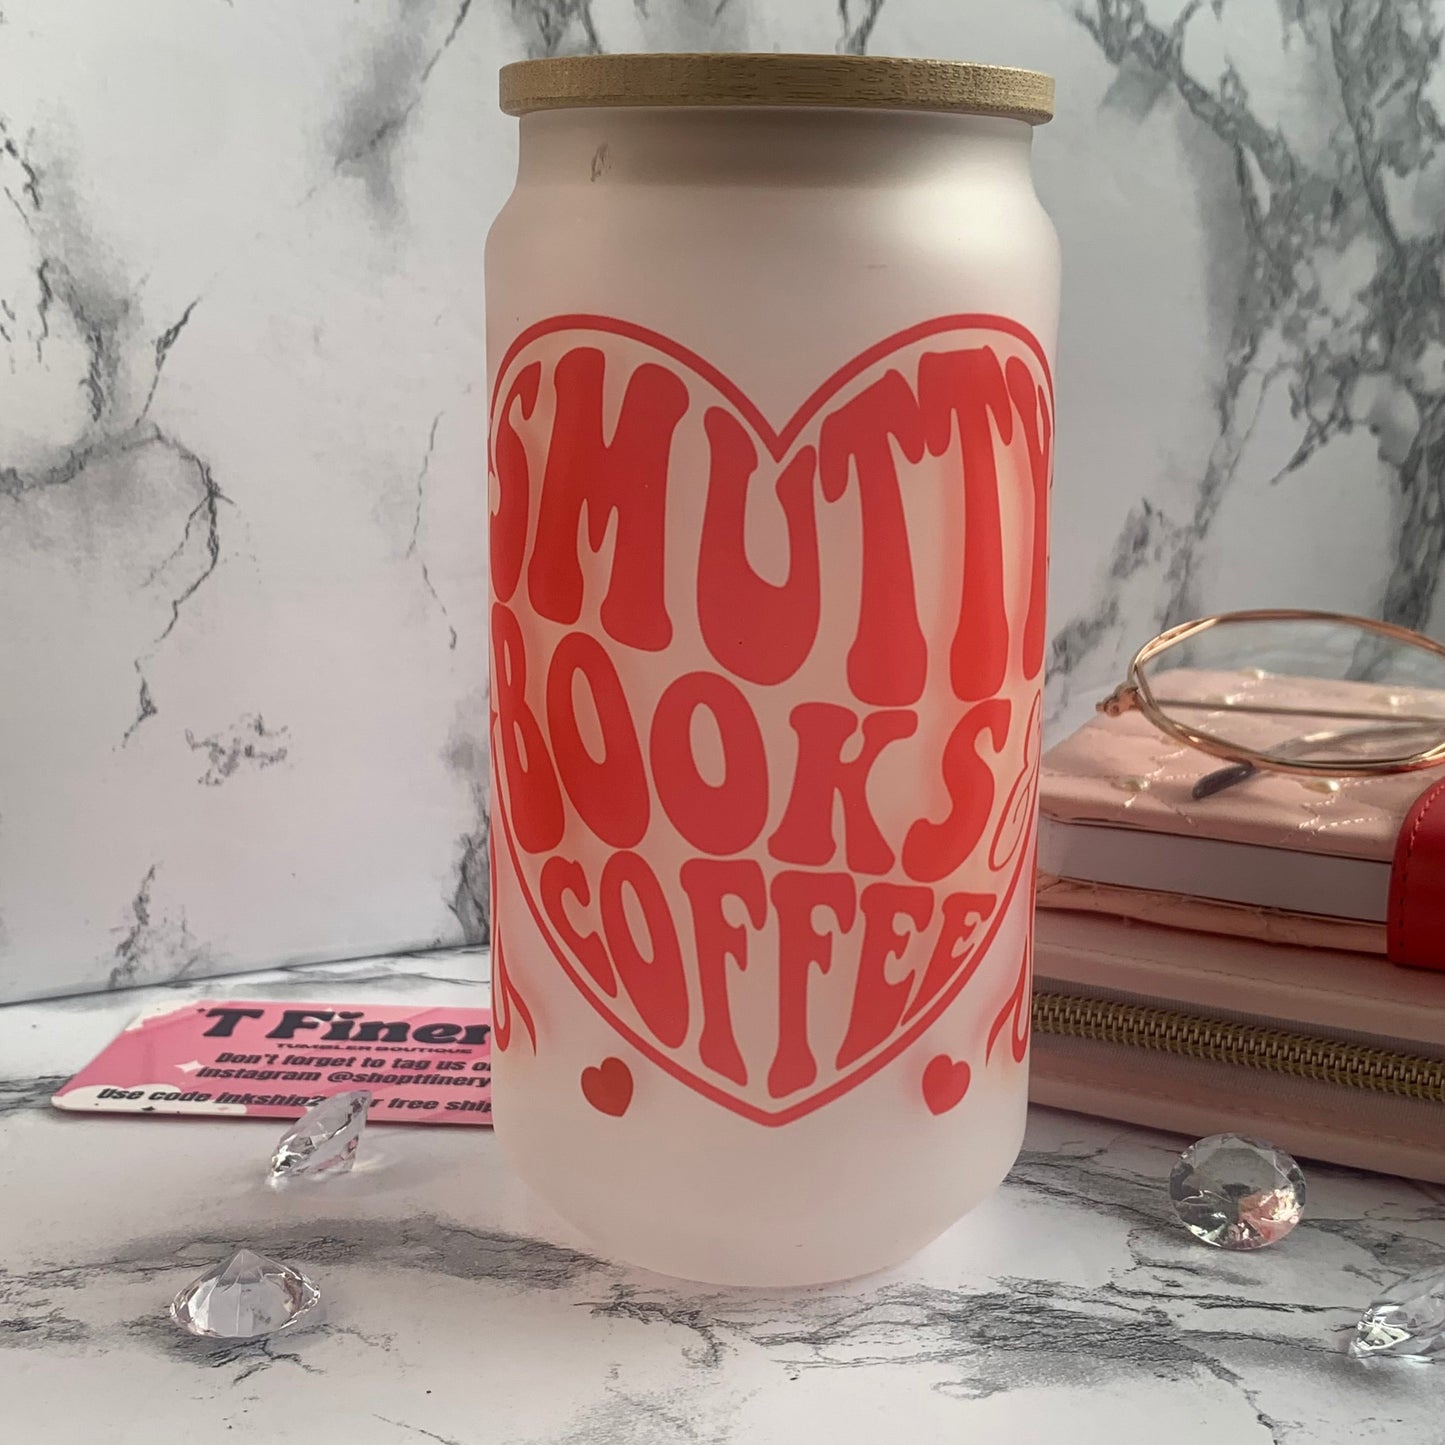 Smutty Books and Coffee Glass Cup